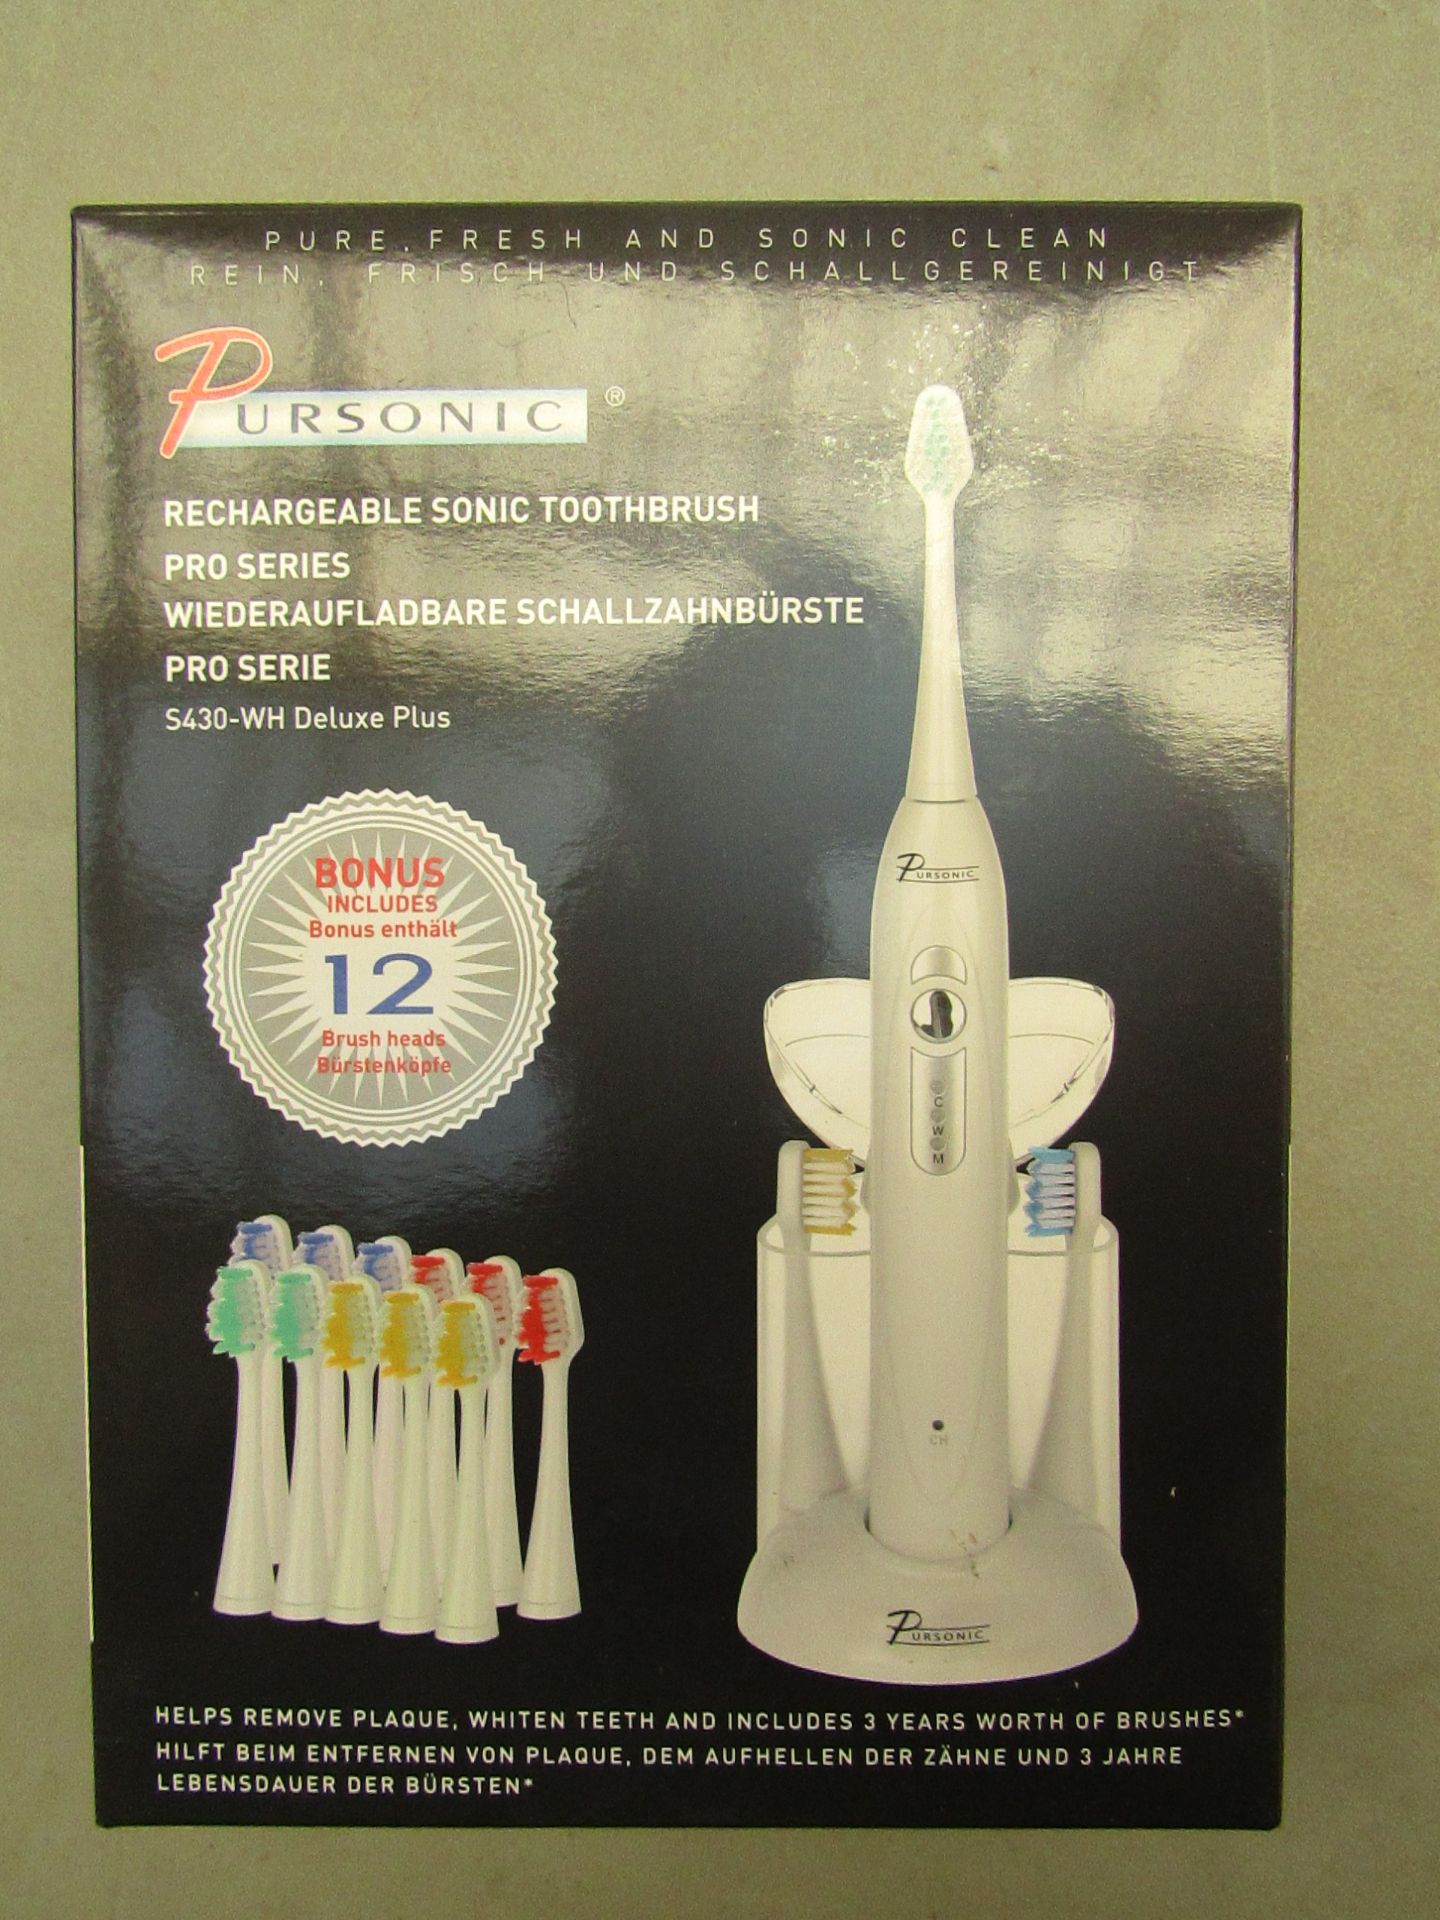 Pursonic Pro Series rechargeable sonic toothbrush including 3 years worth of brush heads brand new